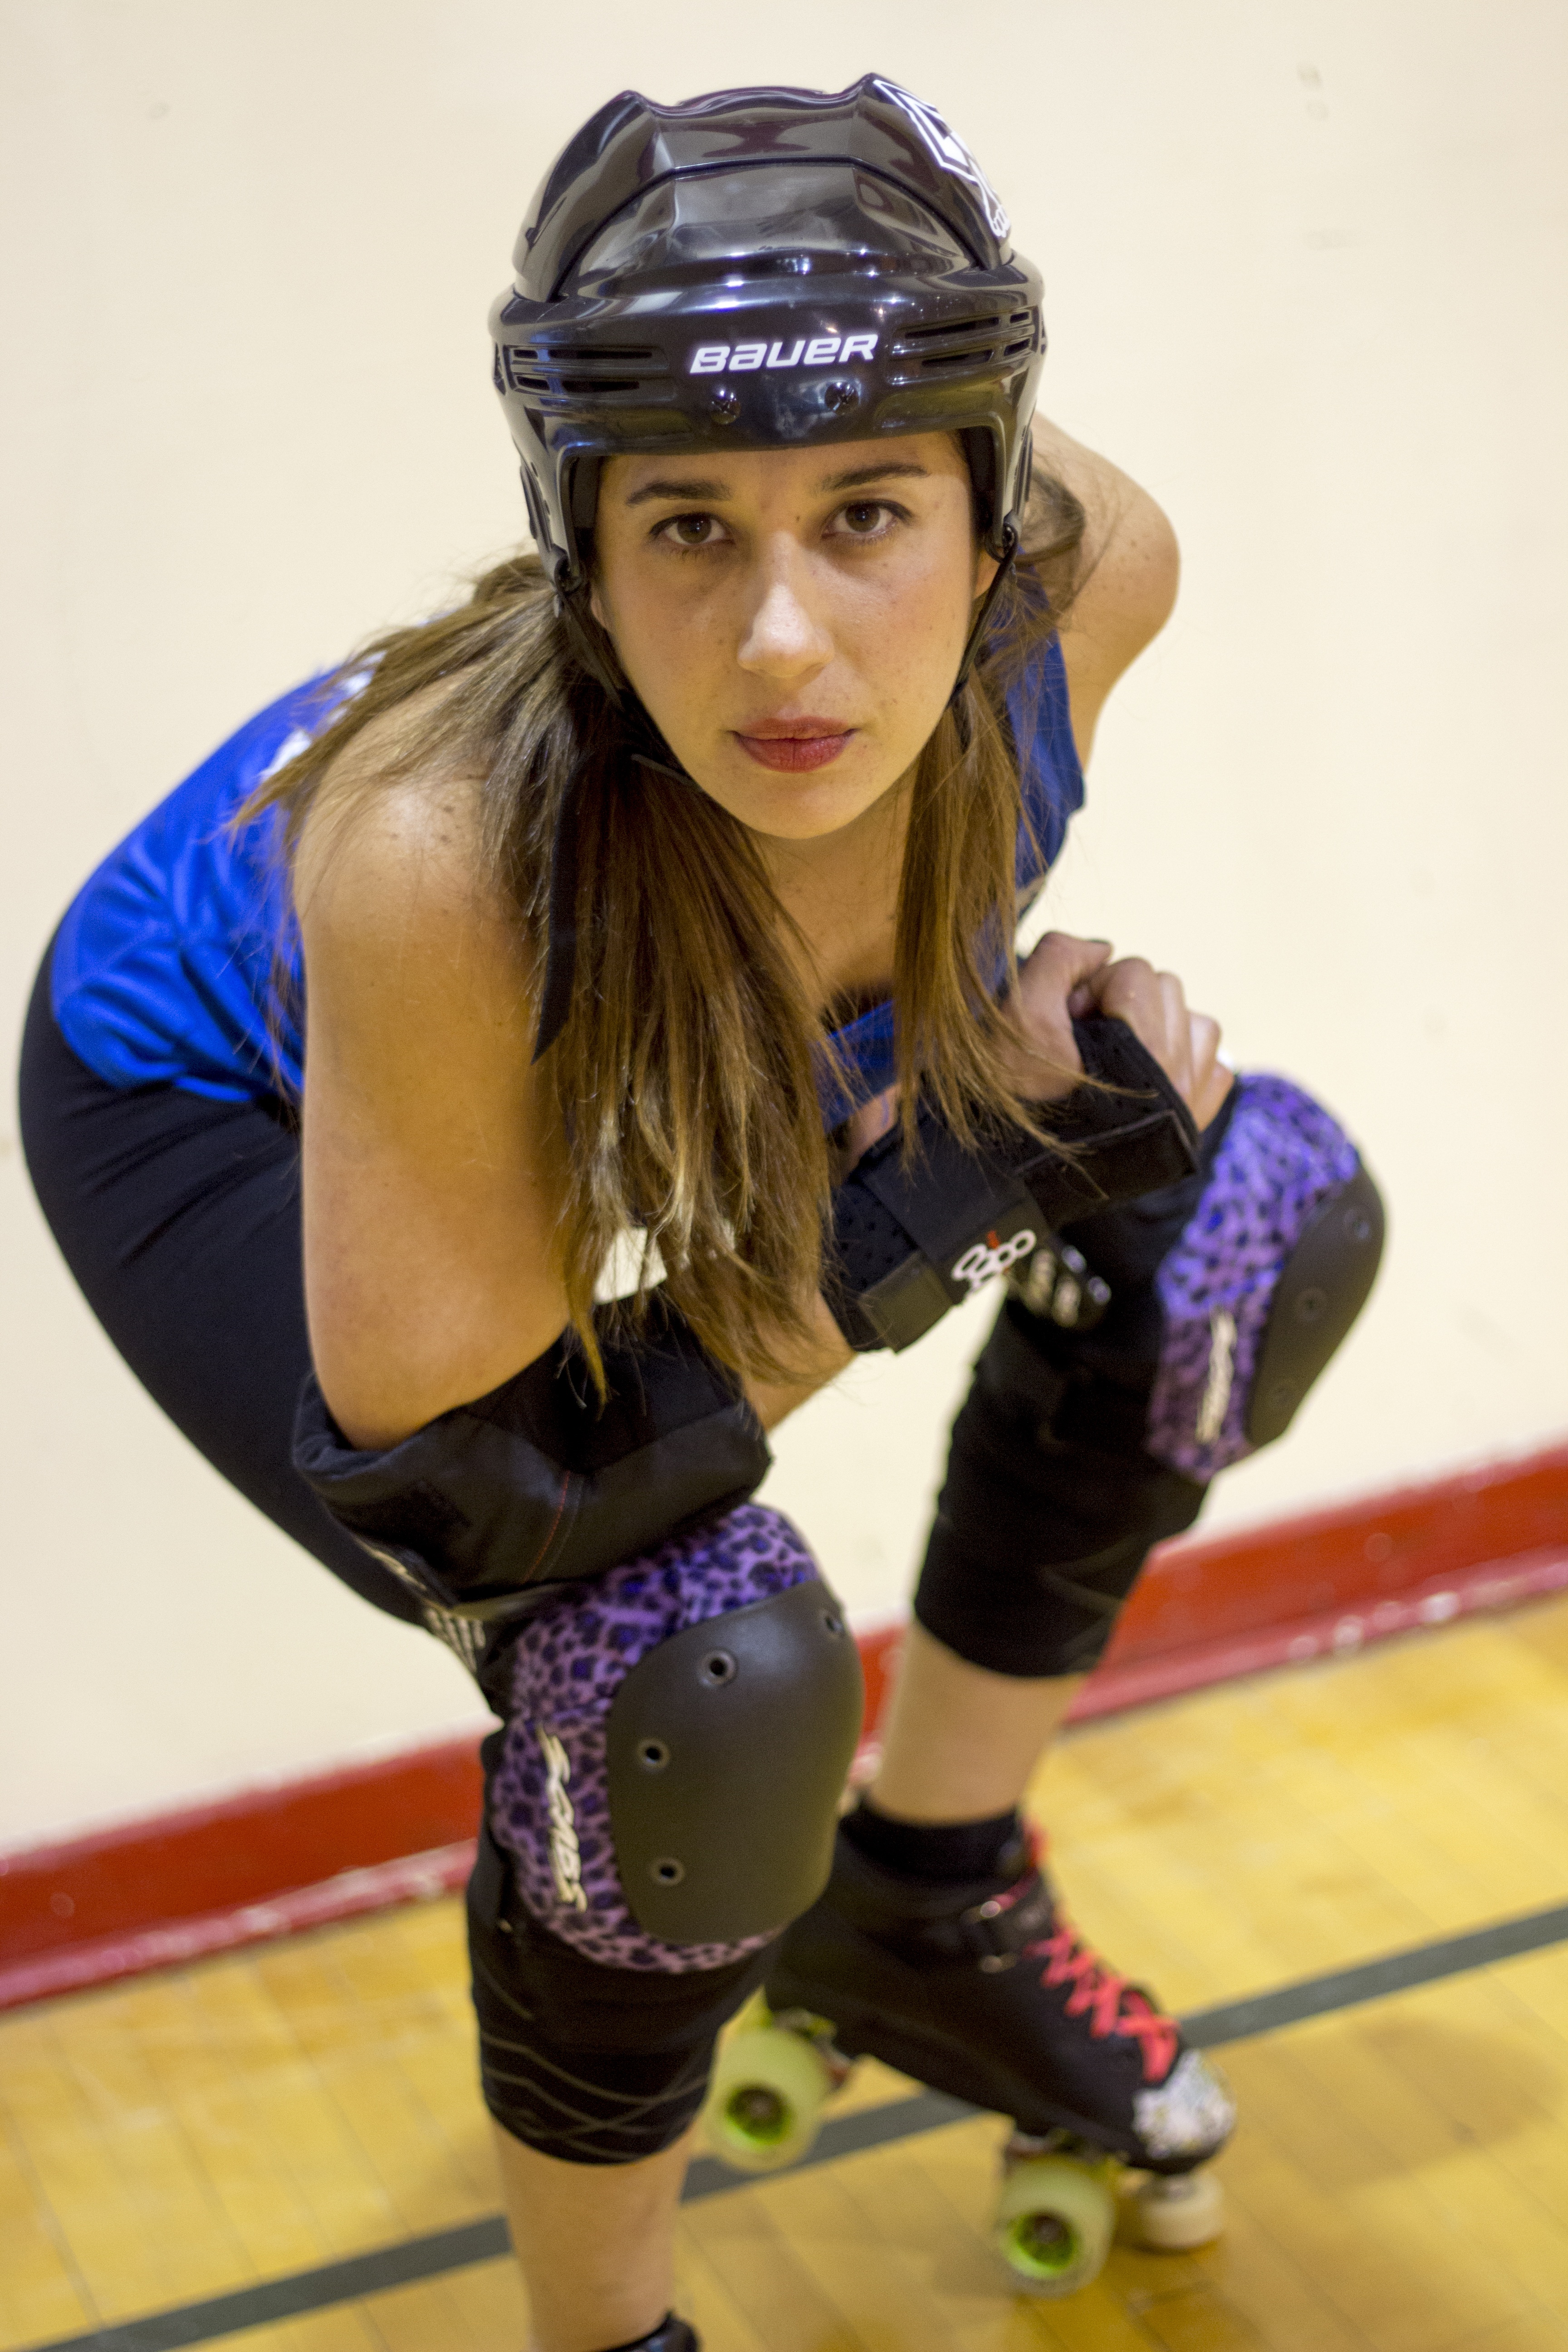 TOUGH GIRL – Elizabeth ‘Mexi-Krash’ is a member of the Nuclear Free Roller Derby team in Central Alberta. She has been a participant for a year and a half and has no intentions of slowing down.